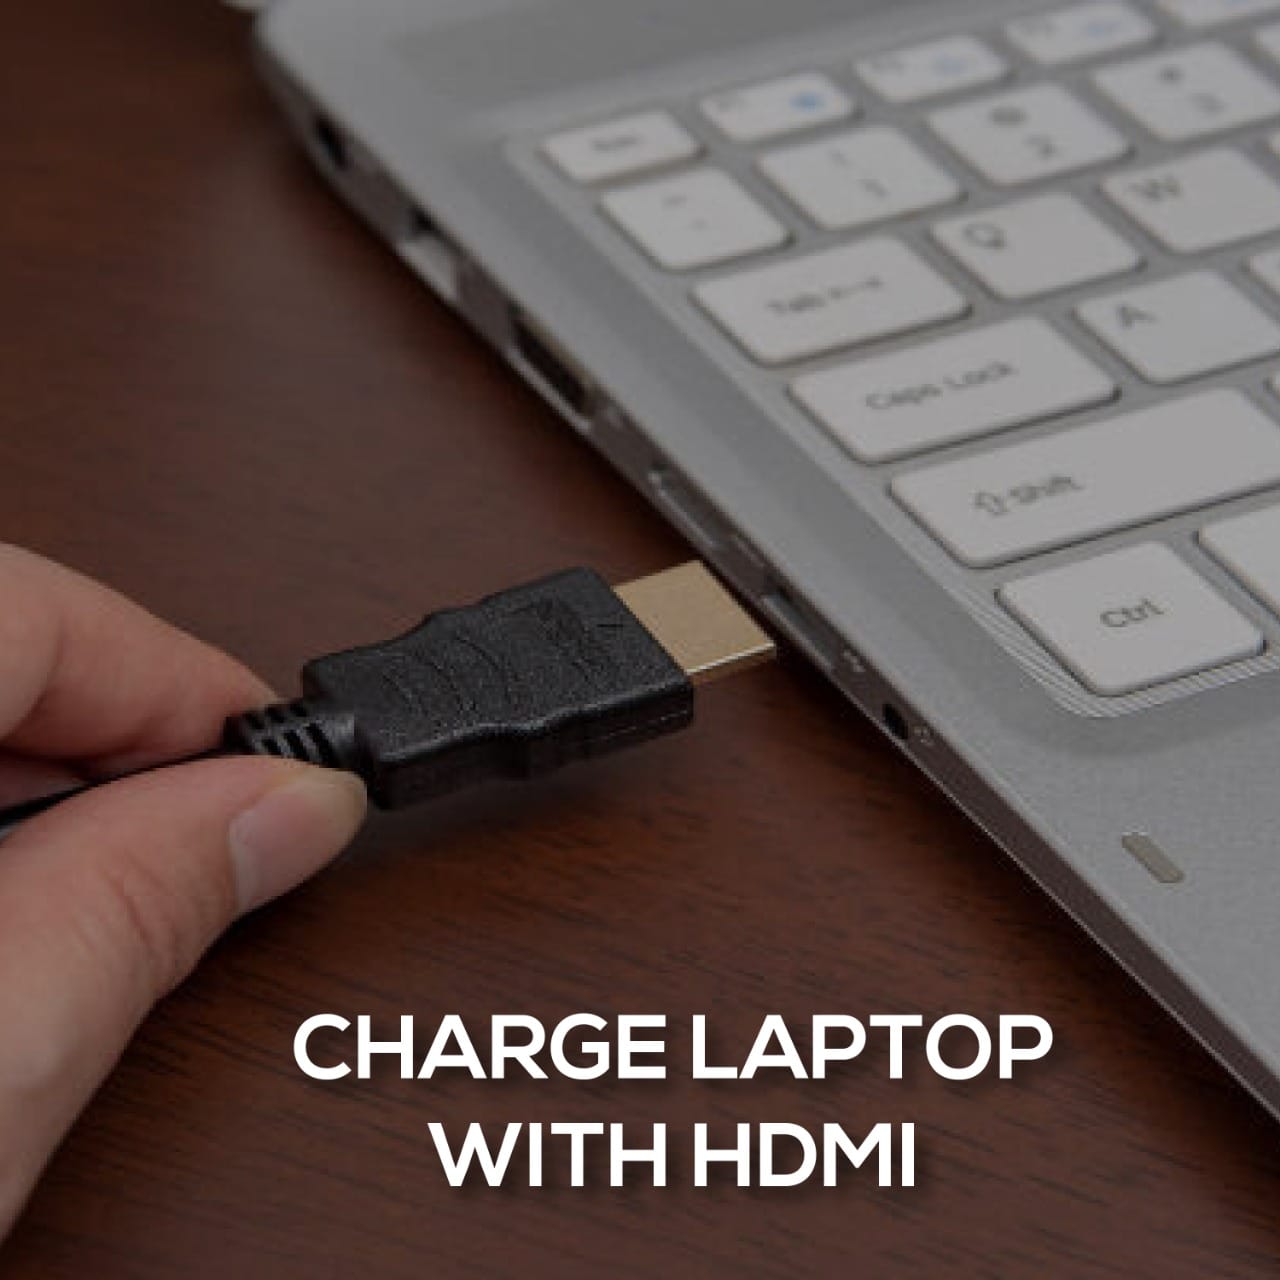 How to charge Laptop with HDMI?